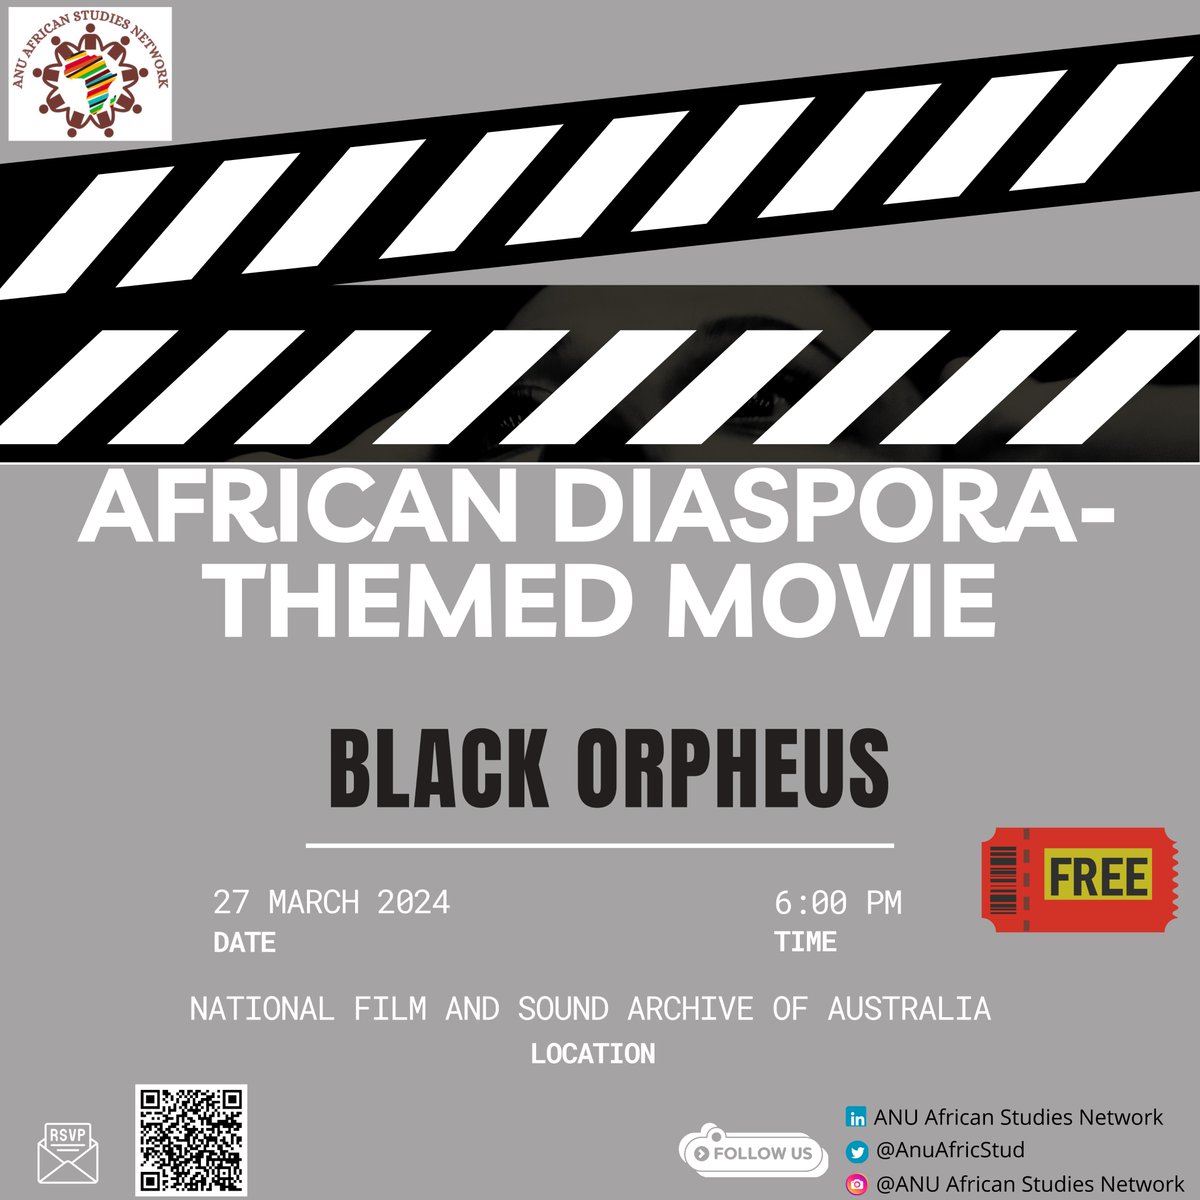 It's today! See you soon. Thank you, @NFSAonline and @ANU_Popsicule for this collaboration. #ANU #Africa